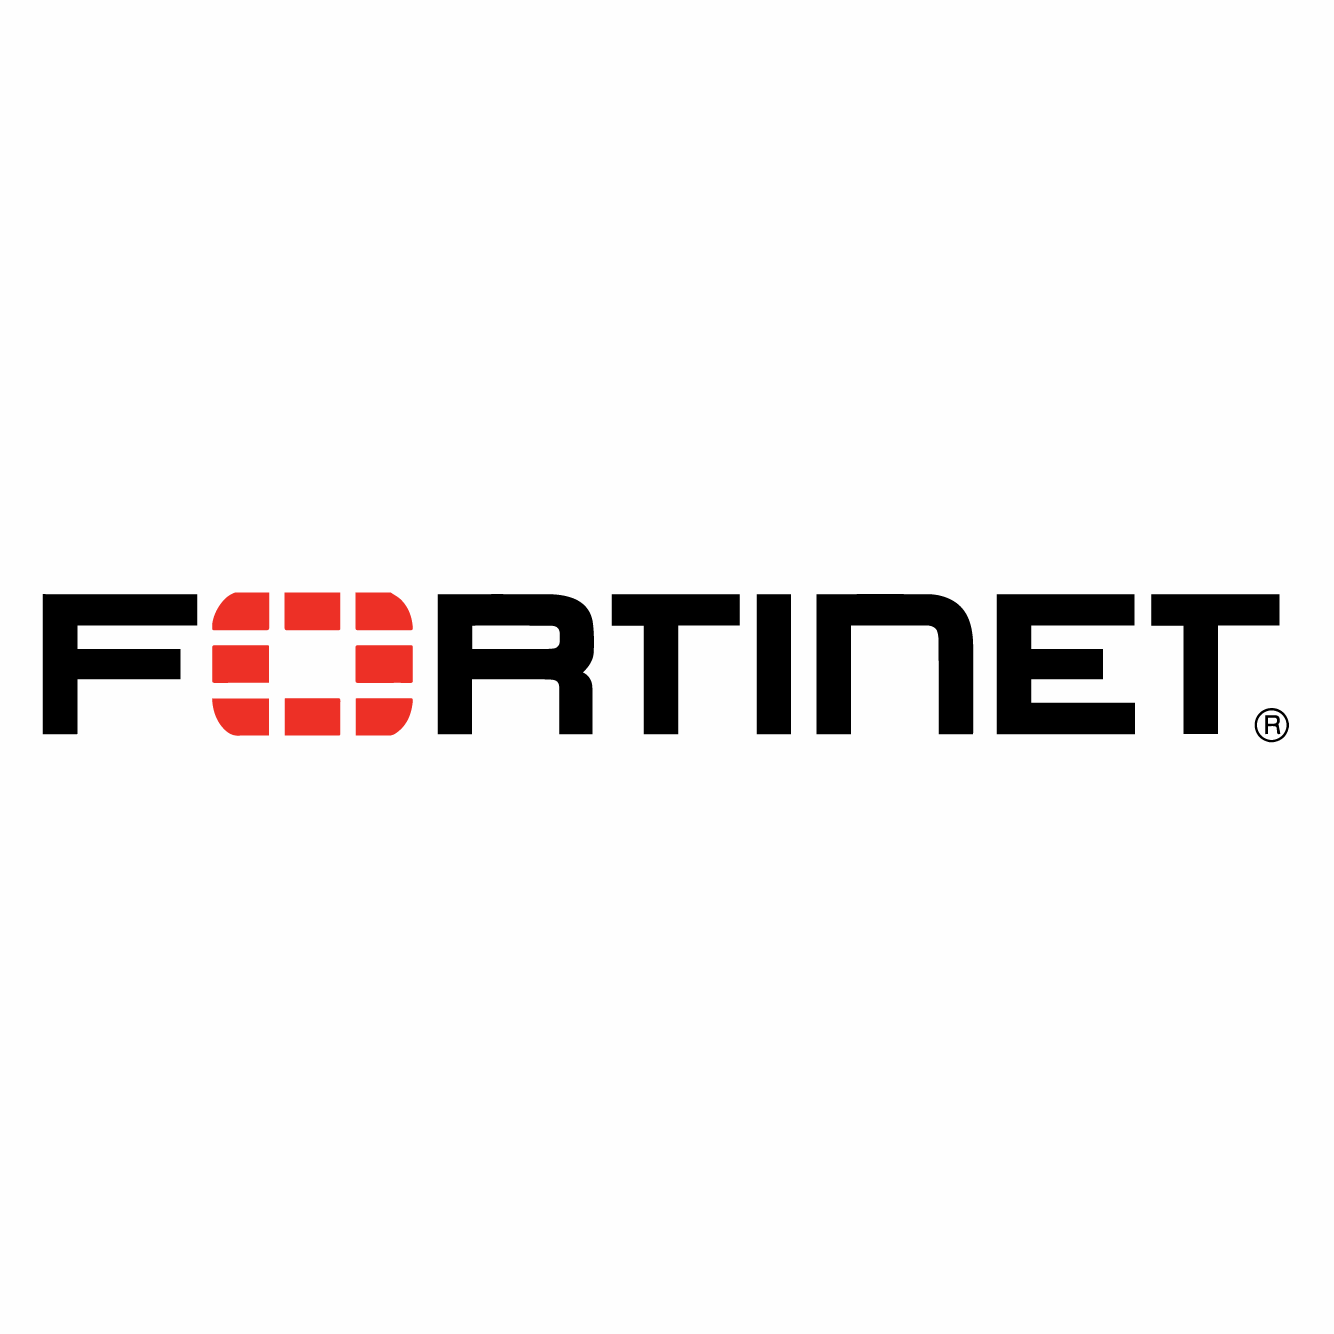 https://securetech.ae/wp-content/uploads/2019/02/05.FORTINET.png